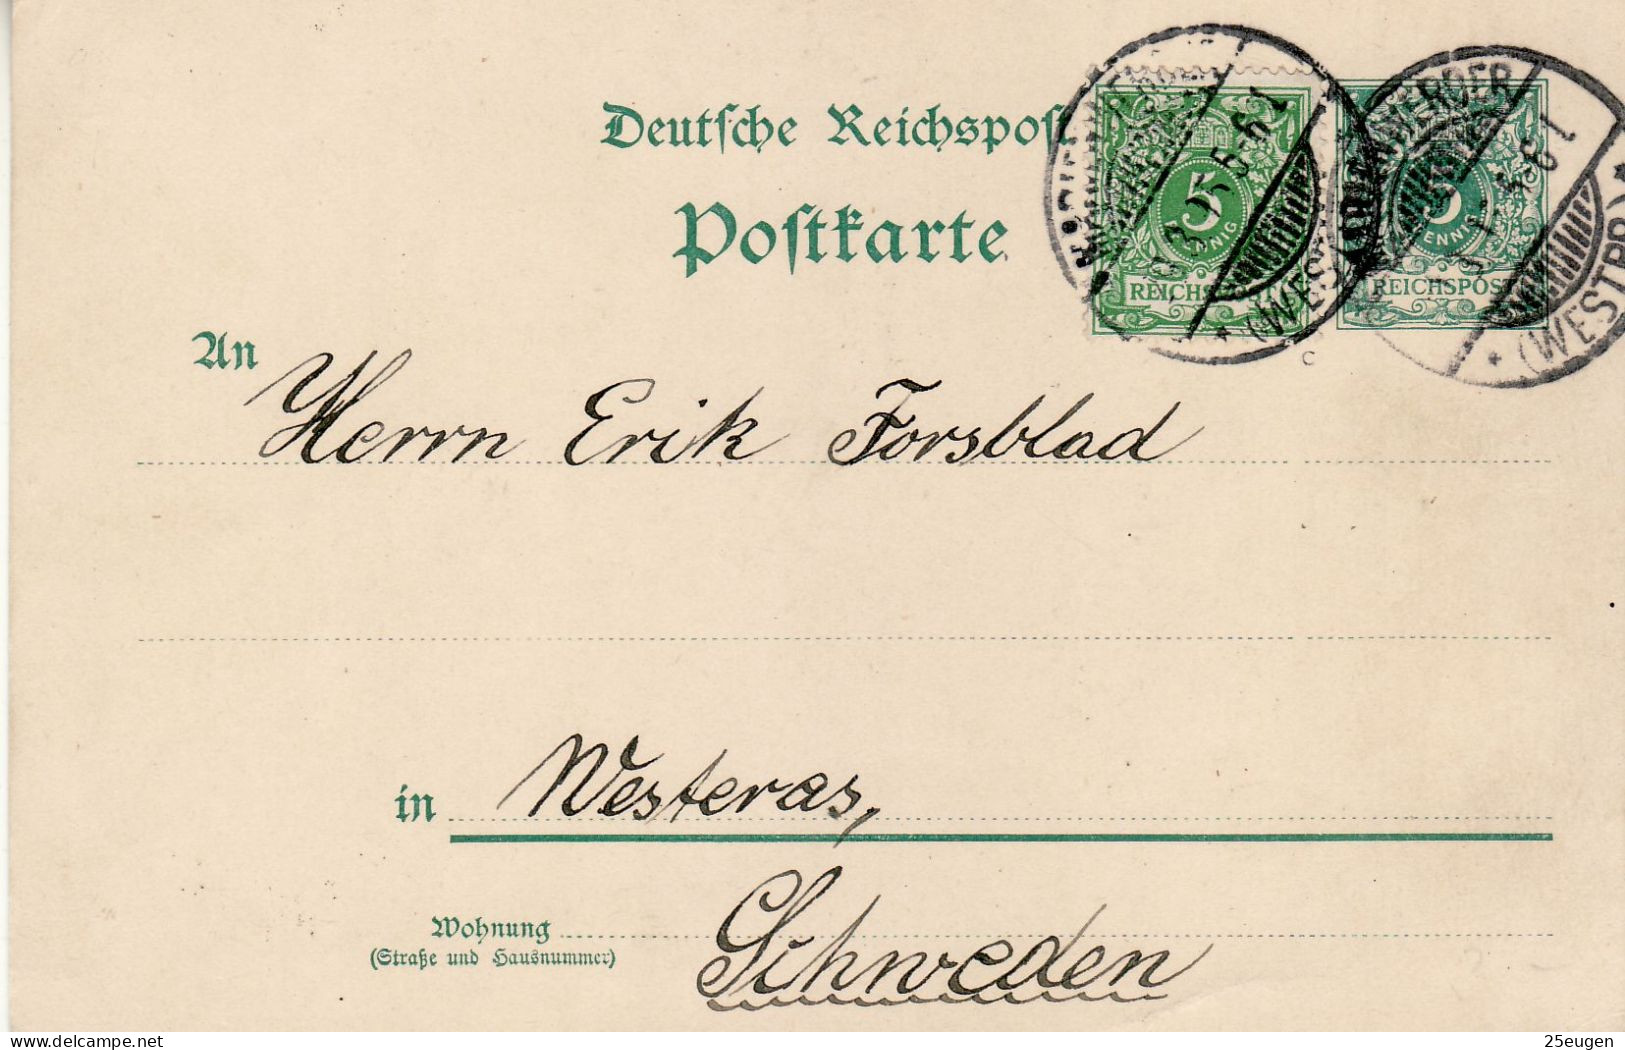 GERMANY EMPIRE 1895 POSTCARD  MiNr P 36 I SENT FROM MARIENWERDER /KWIDZYŃ/ TO WESTERAS - Lettres & Documents